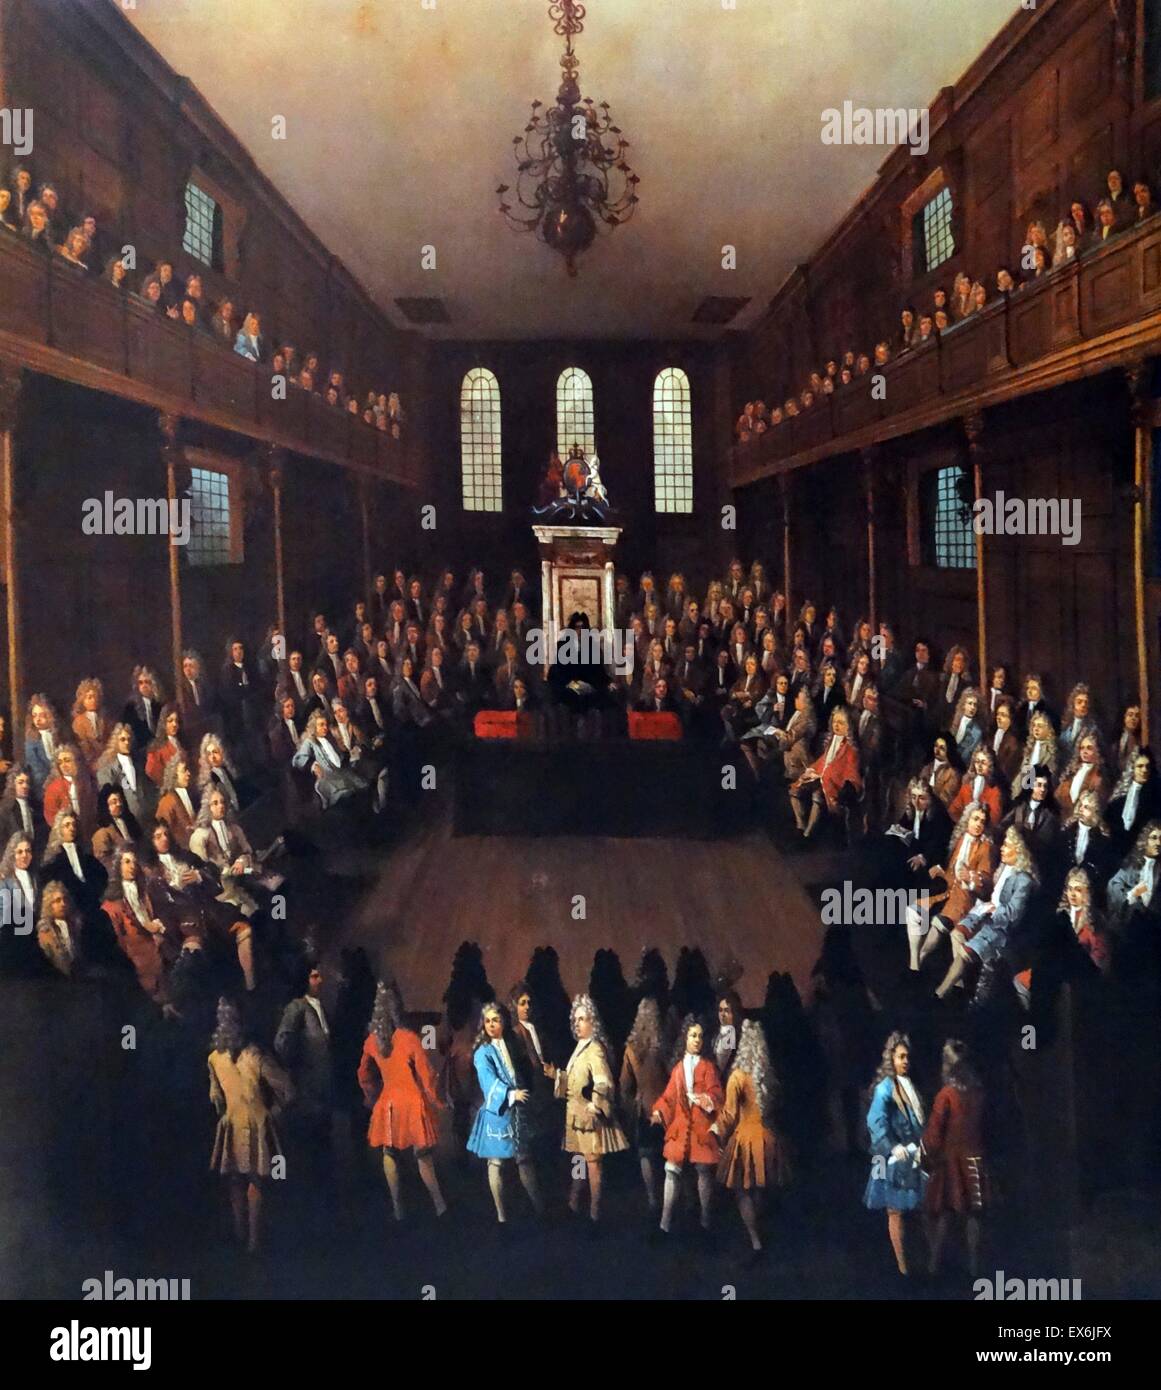 The House of Commons in session, 1710. Sir Richard Onslow in the Speaker's chair. From a painting by Peter Tillemans. From The Island Race, a 20th century book that covers the history of the British Isles from the pre-Roman times to the Victorian era. Wri Stock Photo